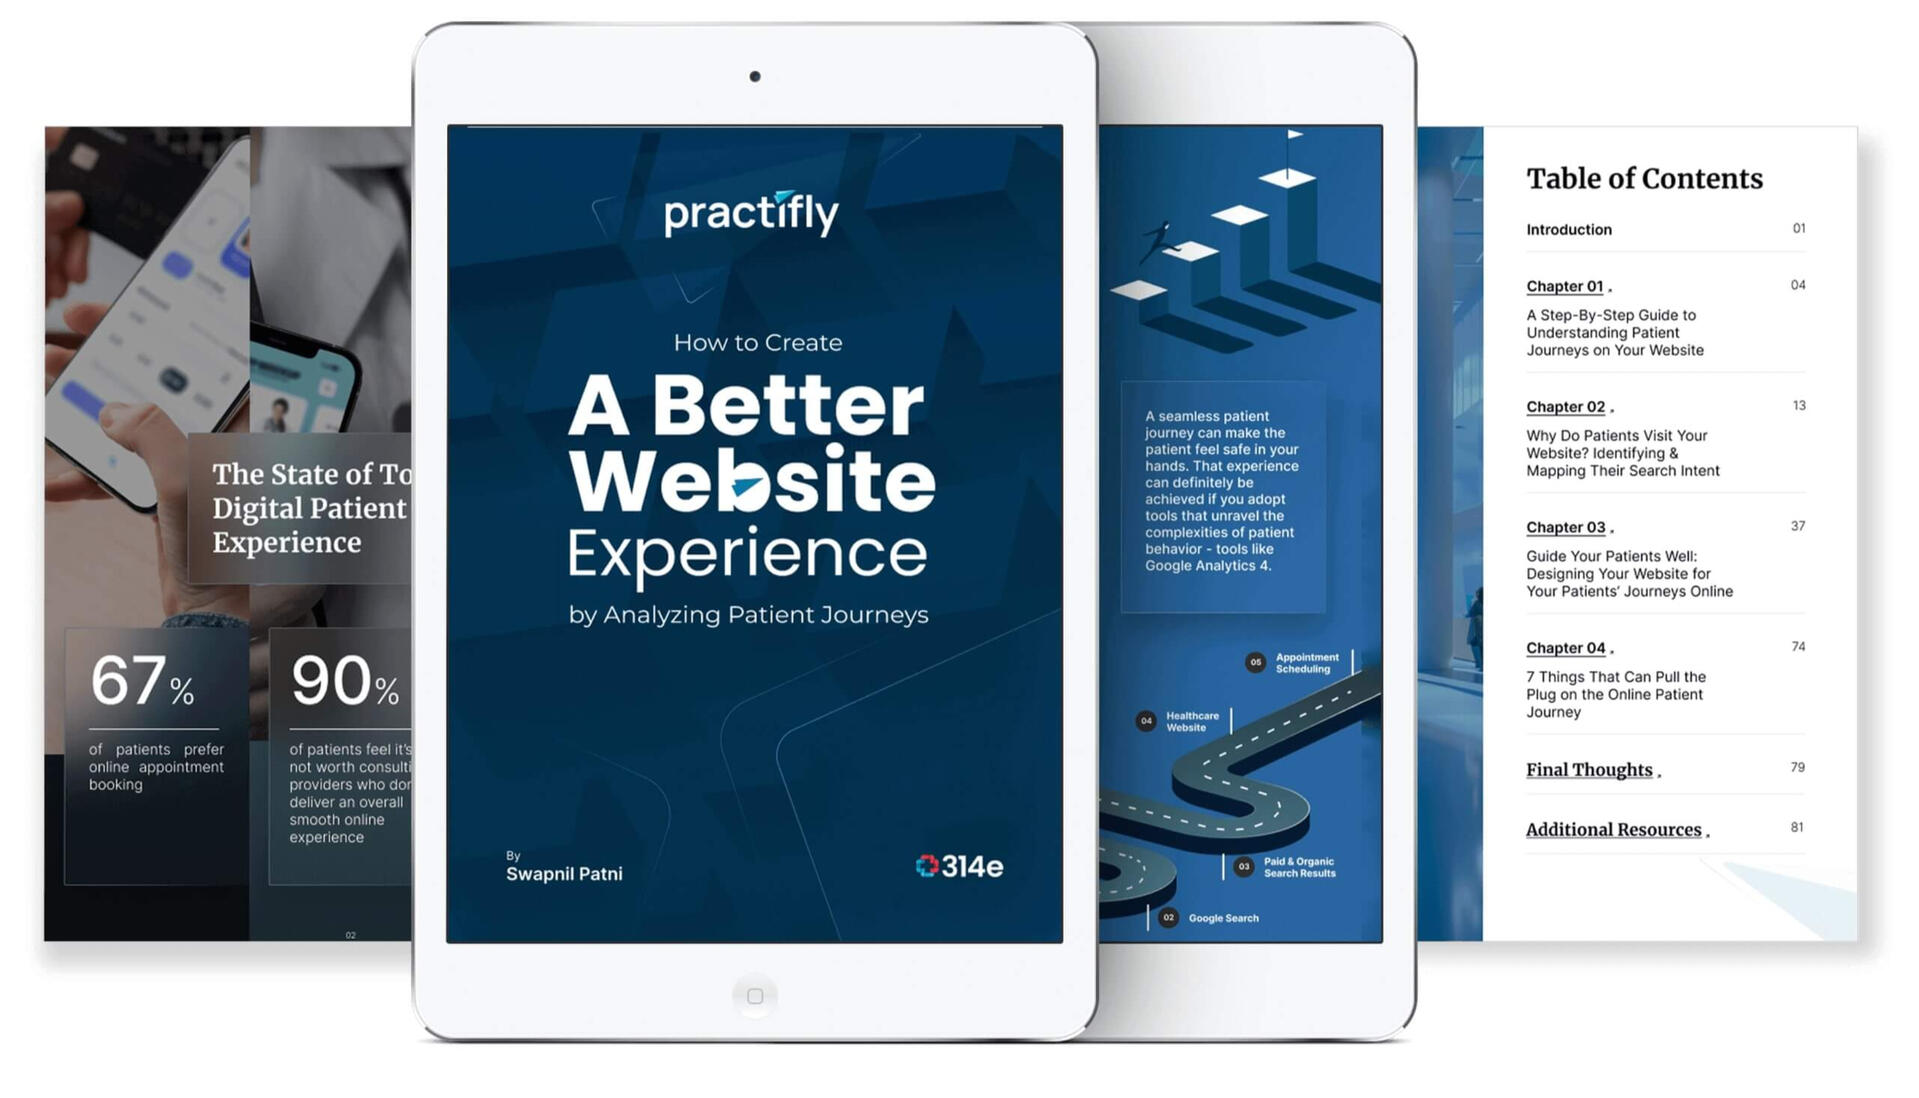 Ebook Glimpse of How to create a better website experience by analyzing patient journeys